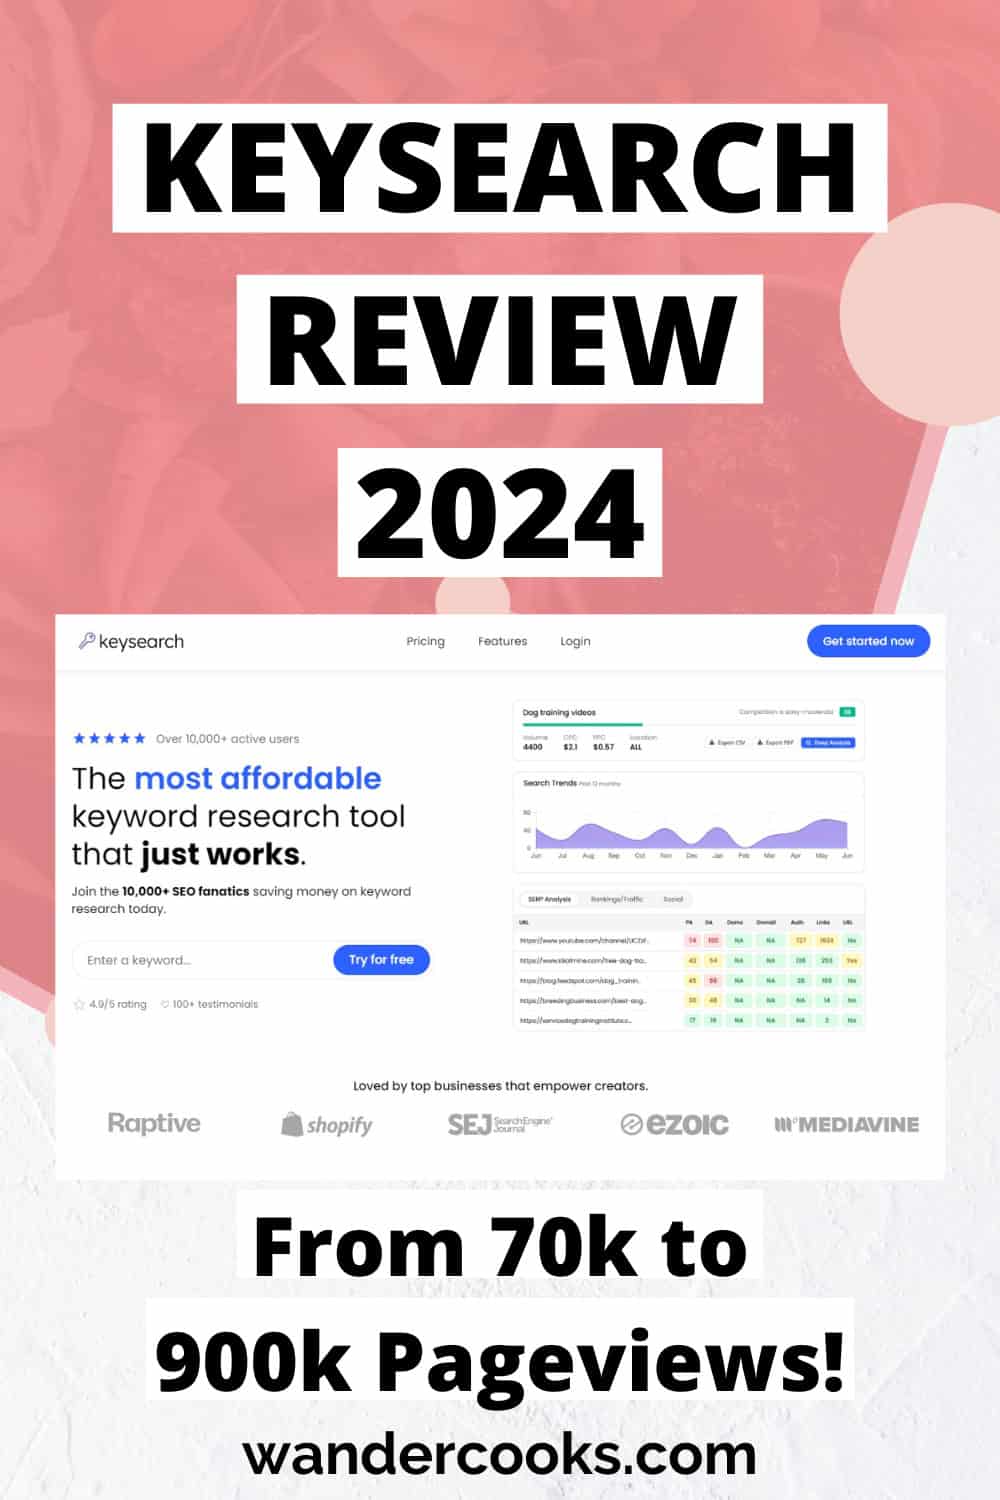 KeySearch Review 2024 - Why It\'s Still The Best